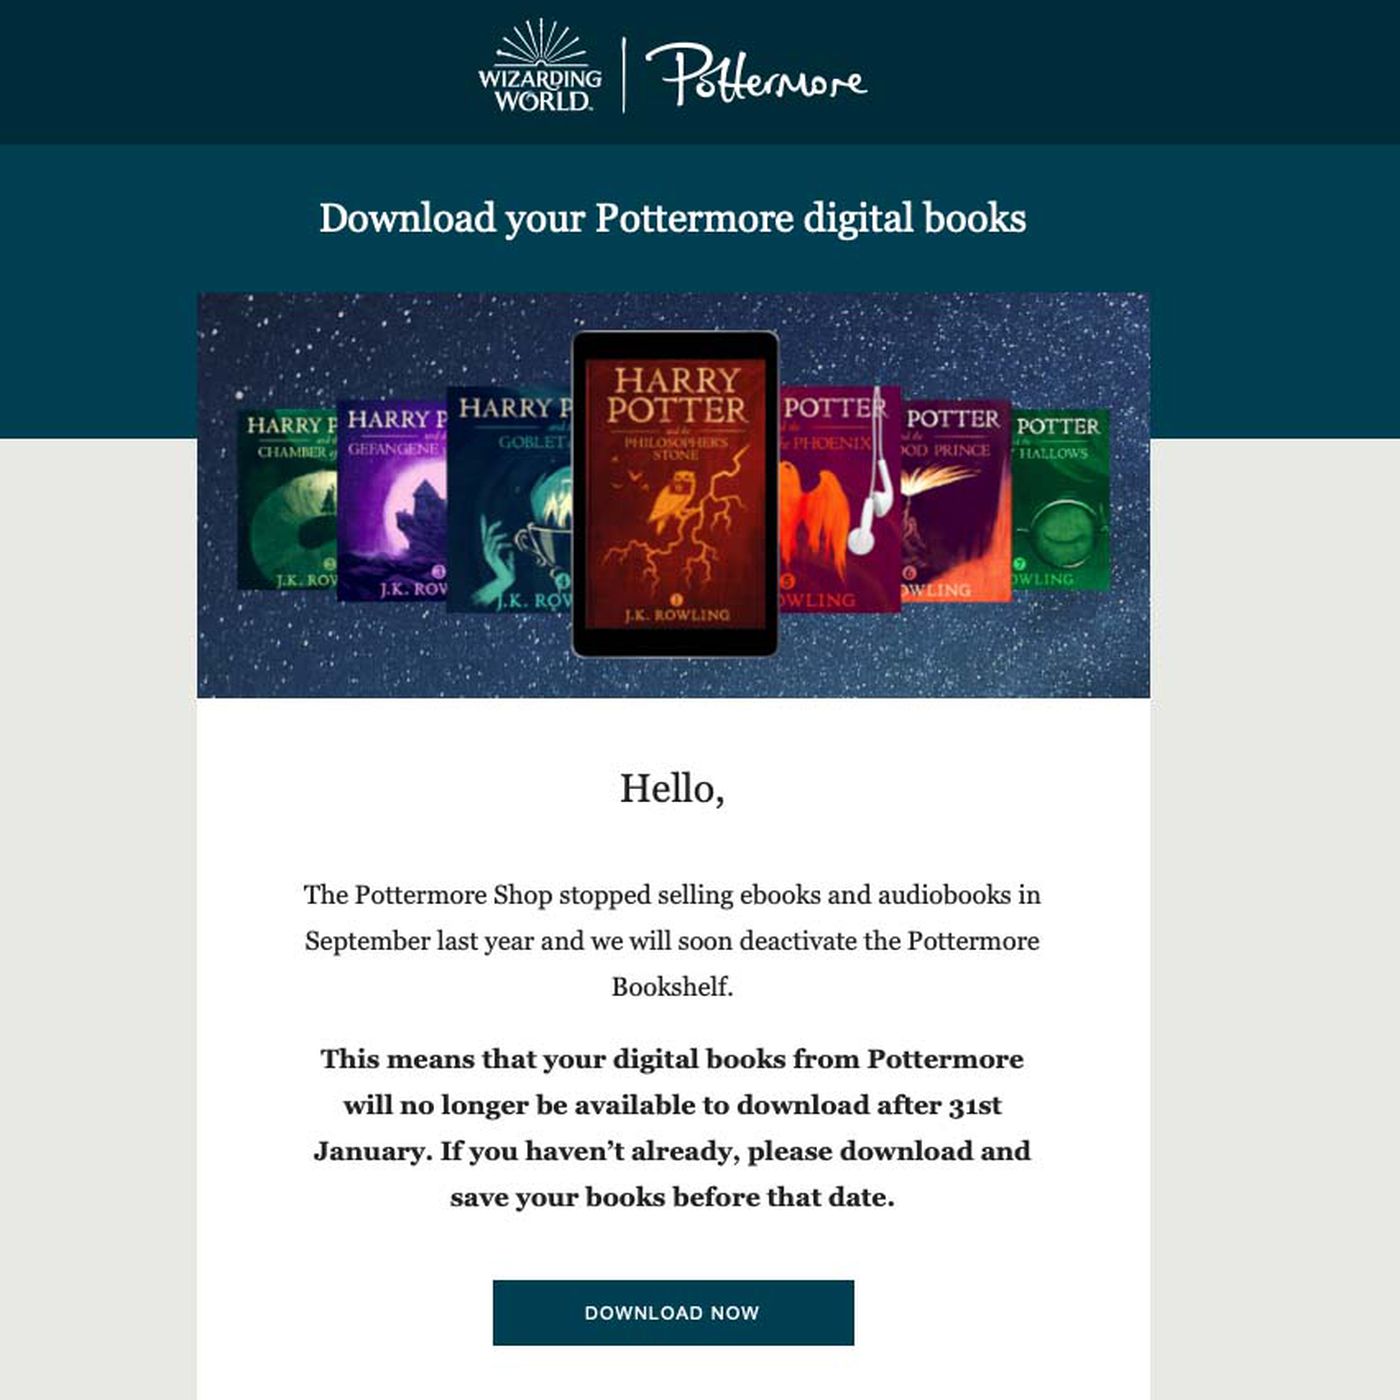 Can I download the Harry Potter books as digital files?